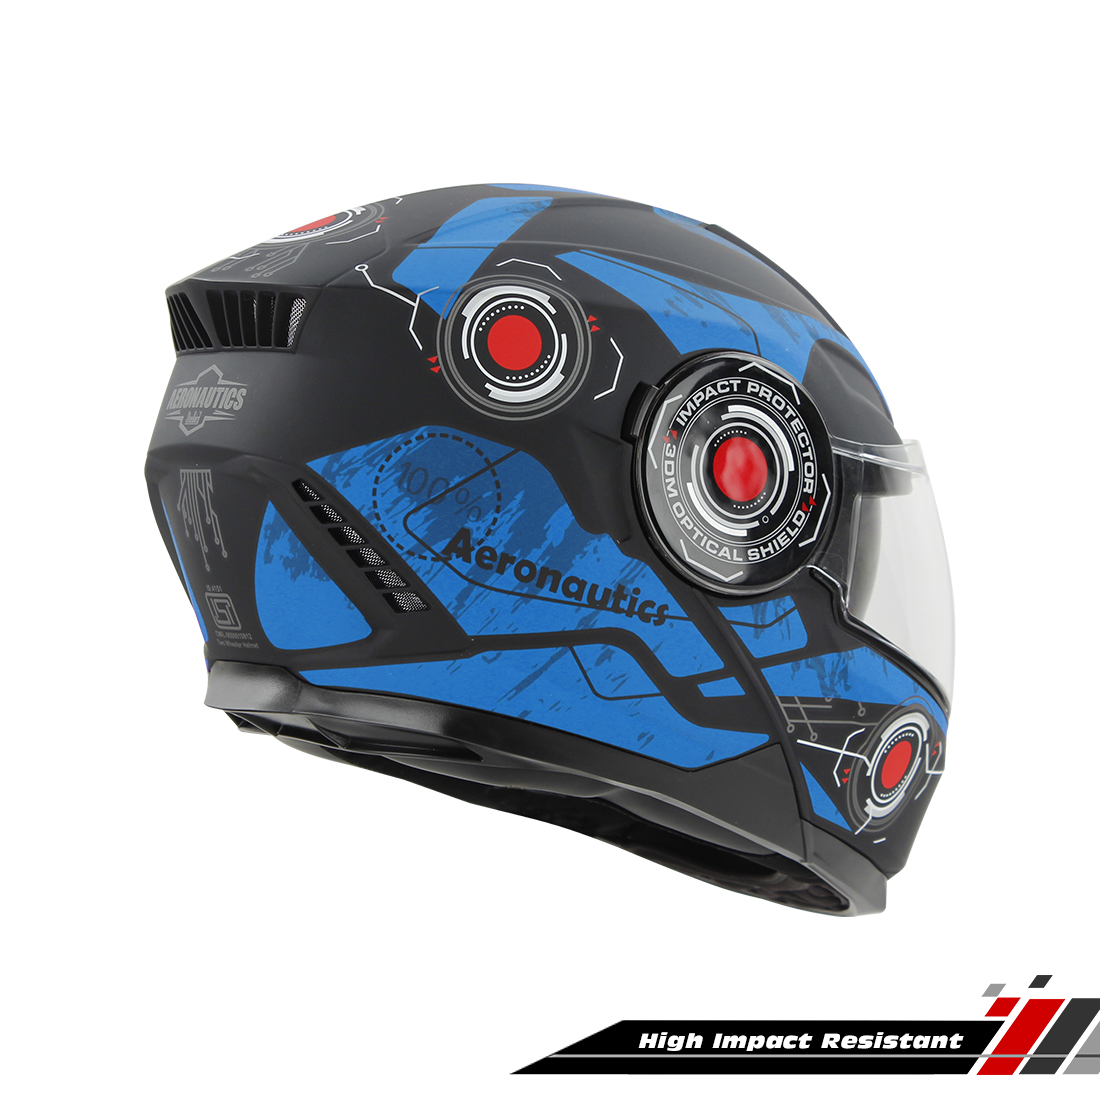 Steelbird SBH-40 Cyber ISI Certified Full Face Graphic Helmet For Men And Women With Inner Sun Shield (Glossy Black Blue)